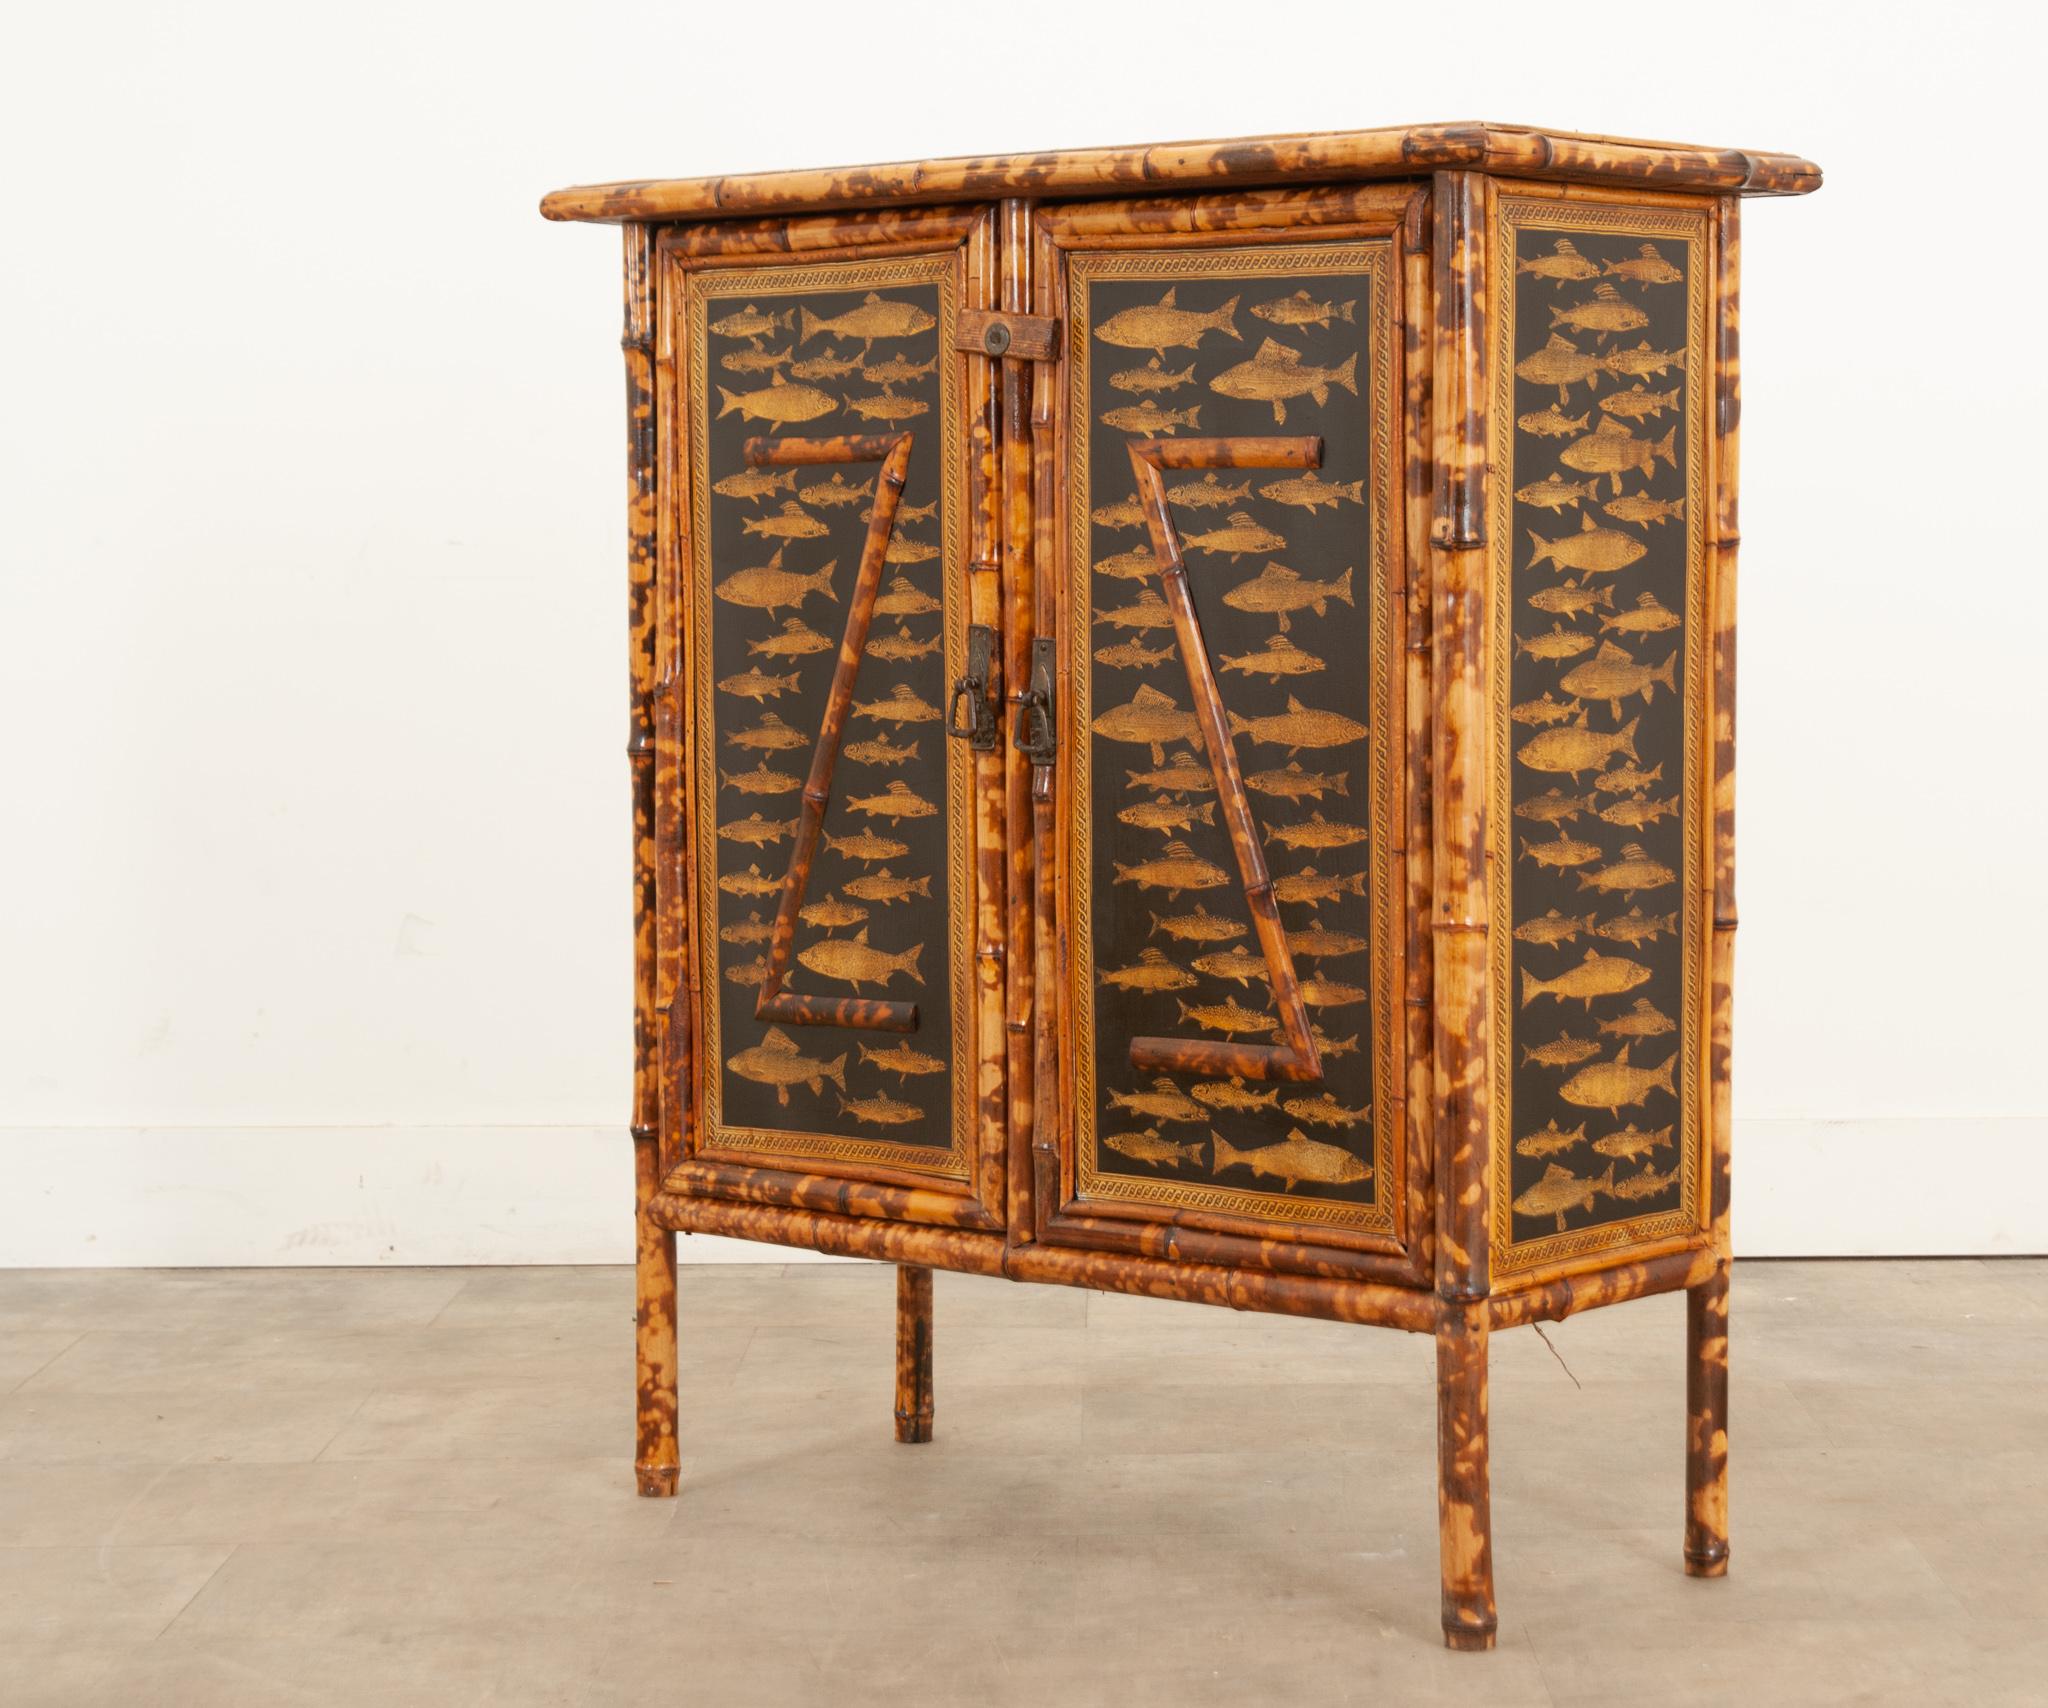 This delightful 19th century English bamboo cabinet has recently been decoupaged with a fish motif on the front, sides, and top. The door latches closed before an interior storage compartment outfitted with three spacious shelves. Make sure to view